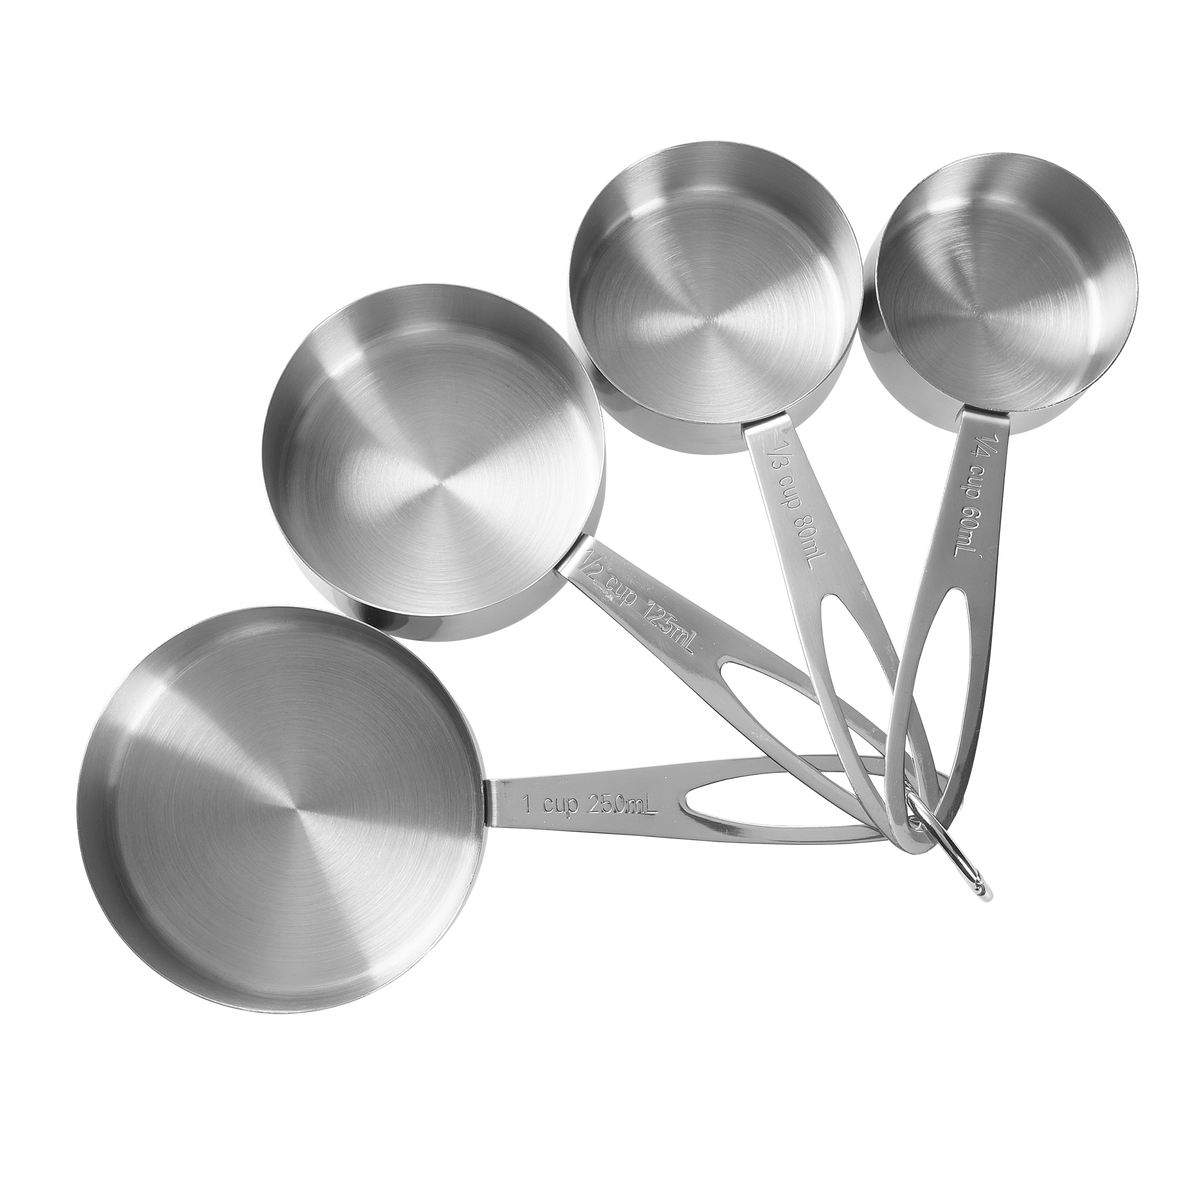 Top view, showing the flat-bottom stainless steel measuring cups in all four sizes.